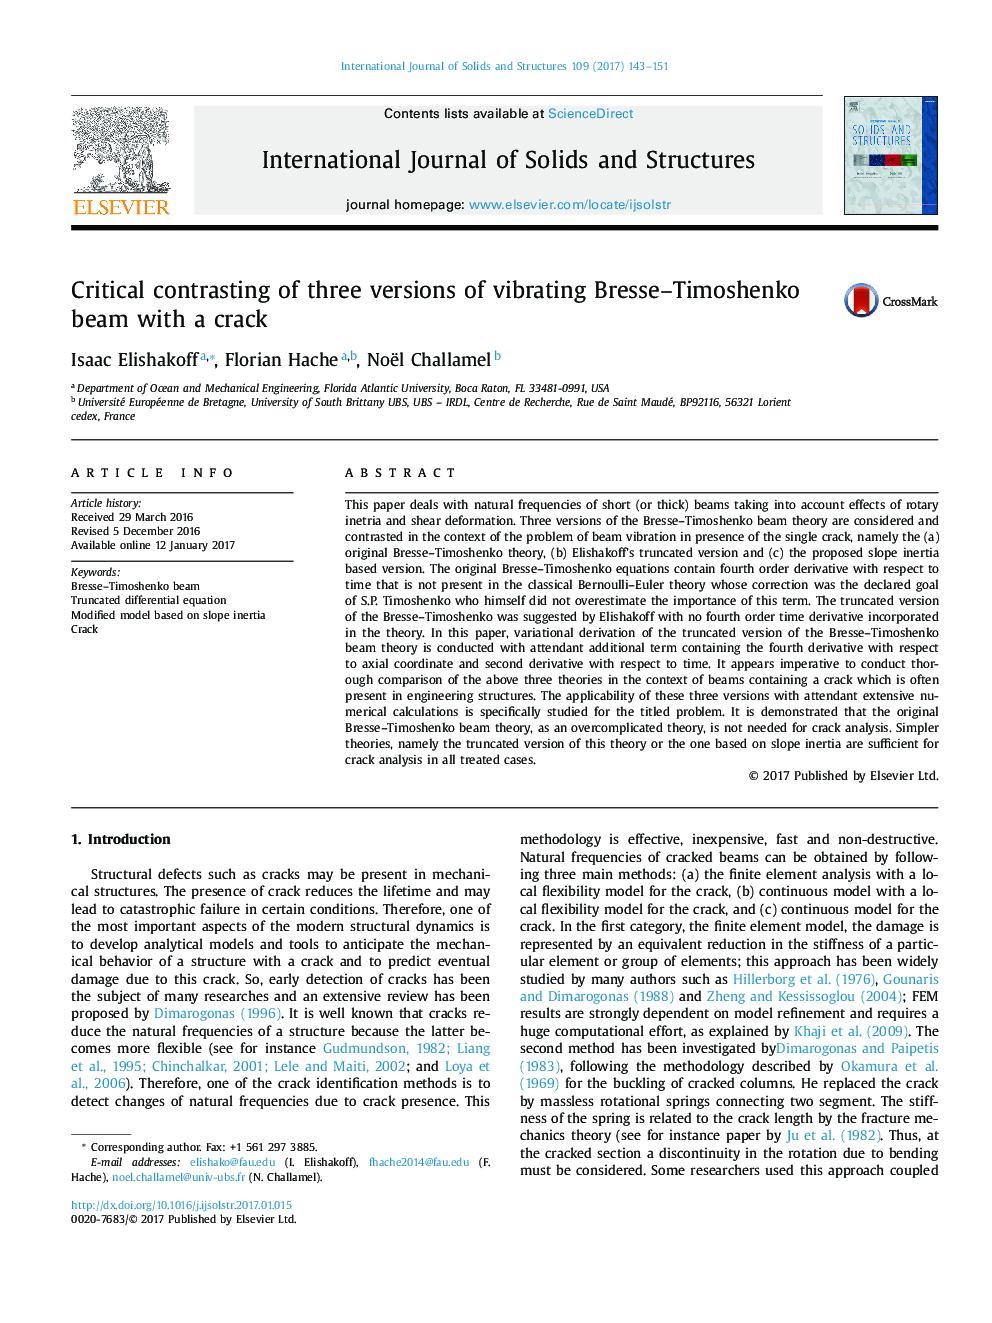 Critical contrasting of three versions of vibrating Bresse-Timoshenko beam with a crack